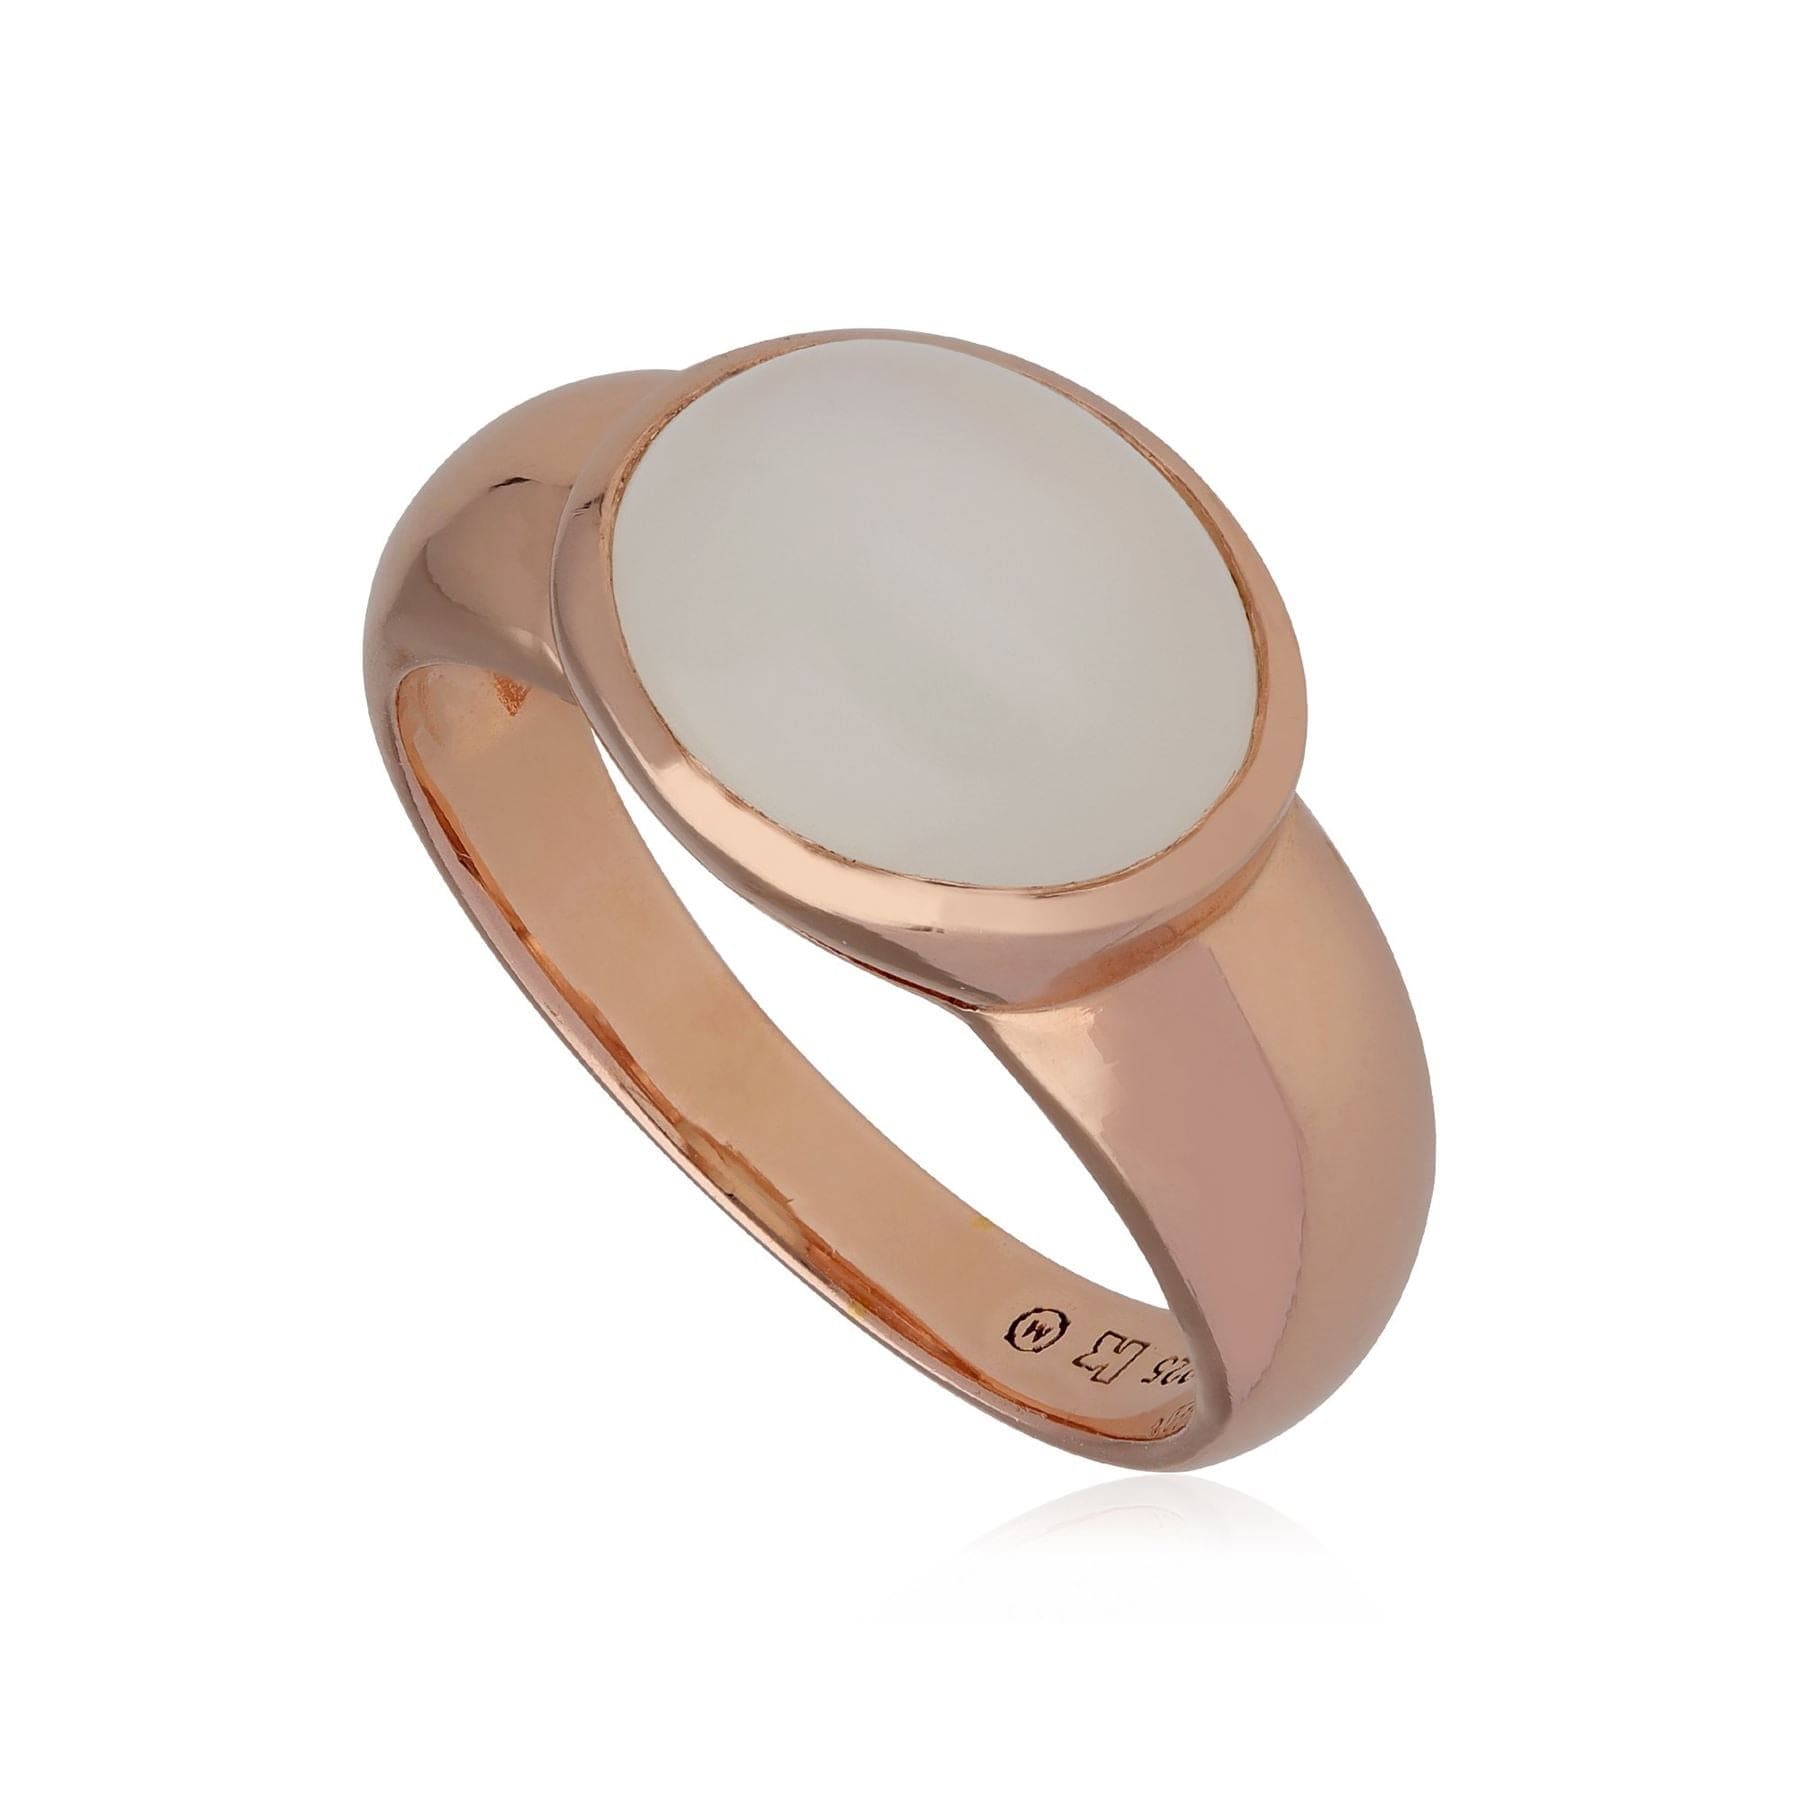 T0966R901317 Kosmos Moonstone Cocktail Ring in Rose Gold Plated Sterling Silver 1